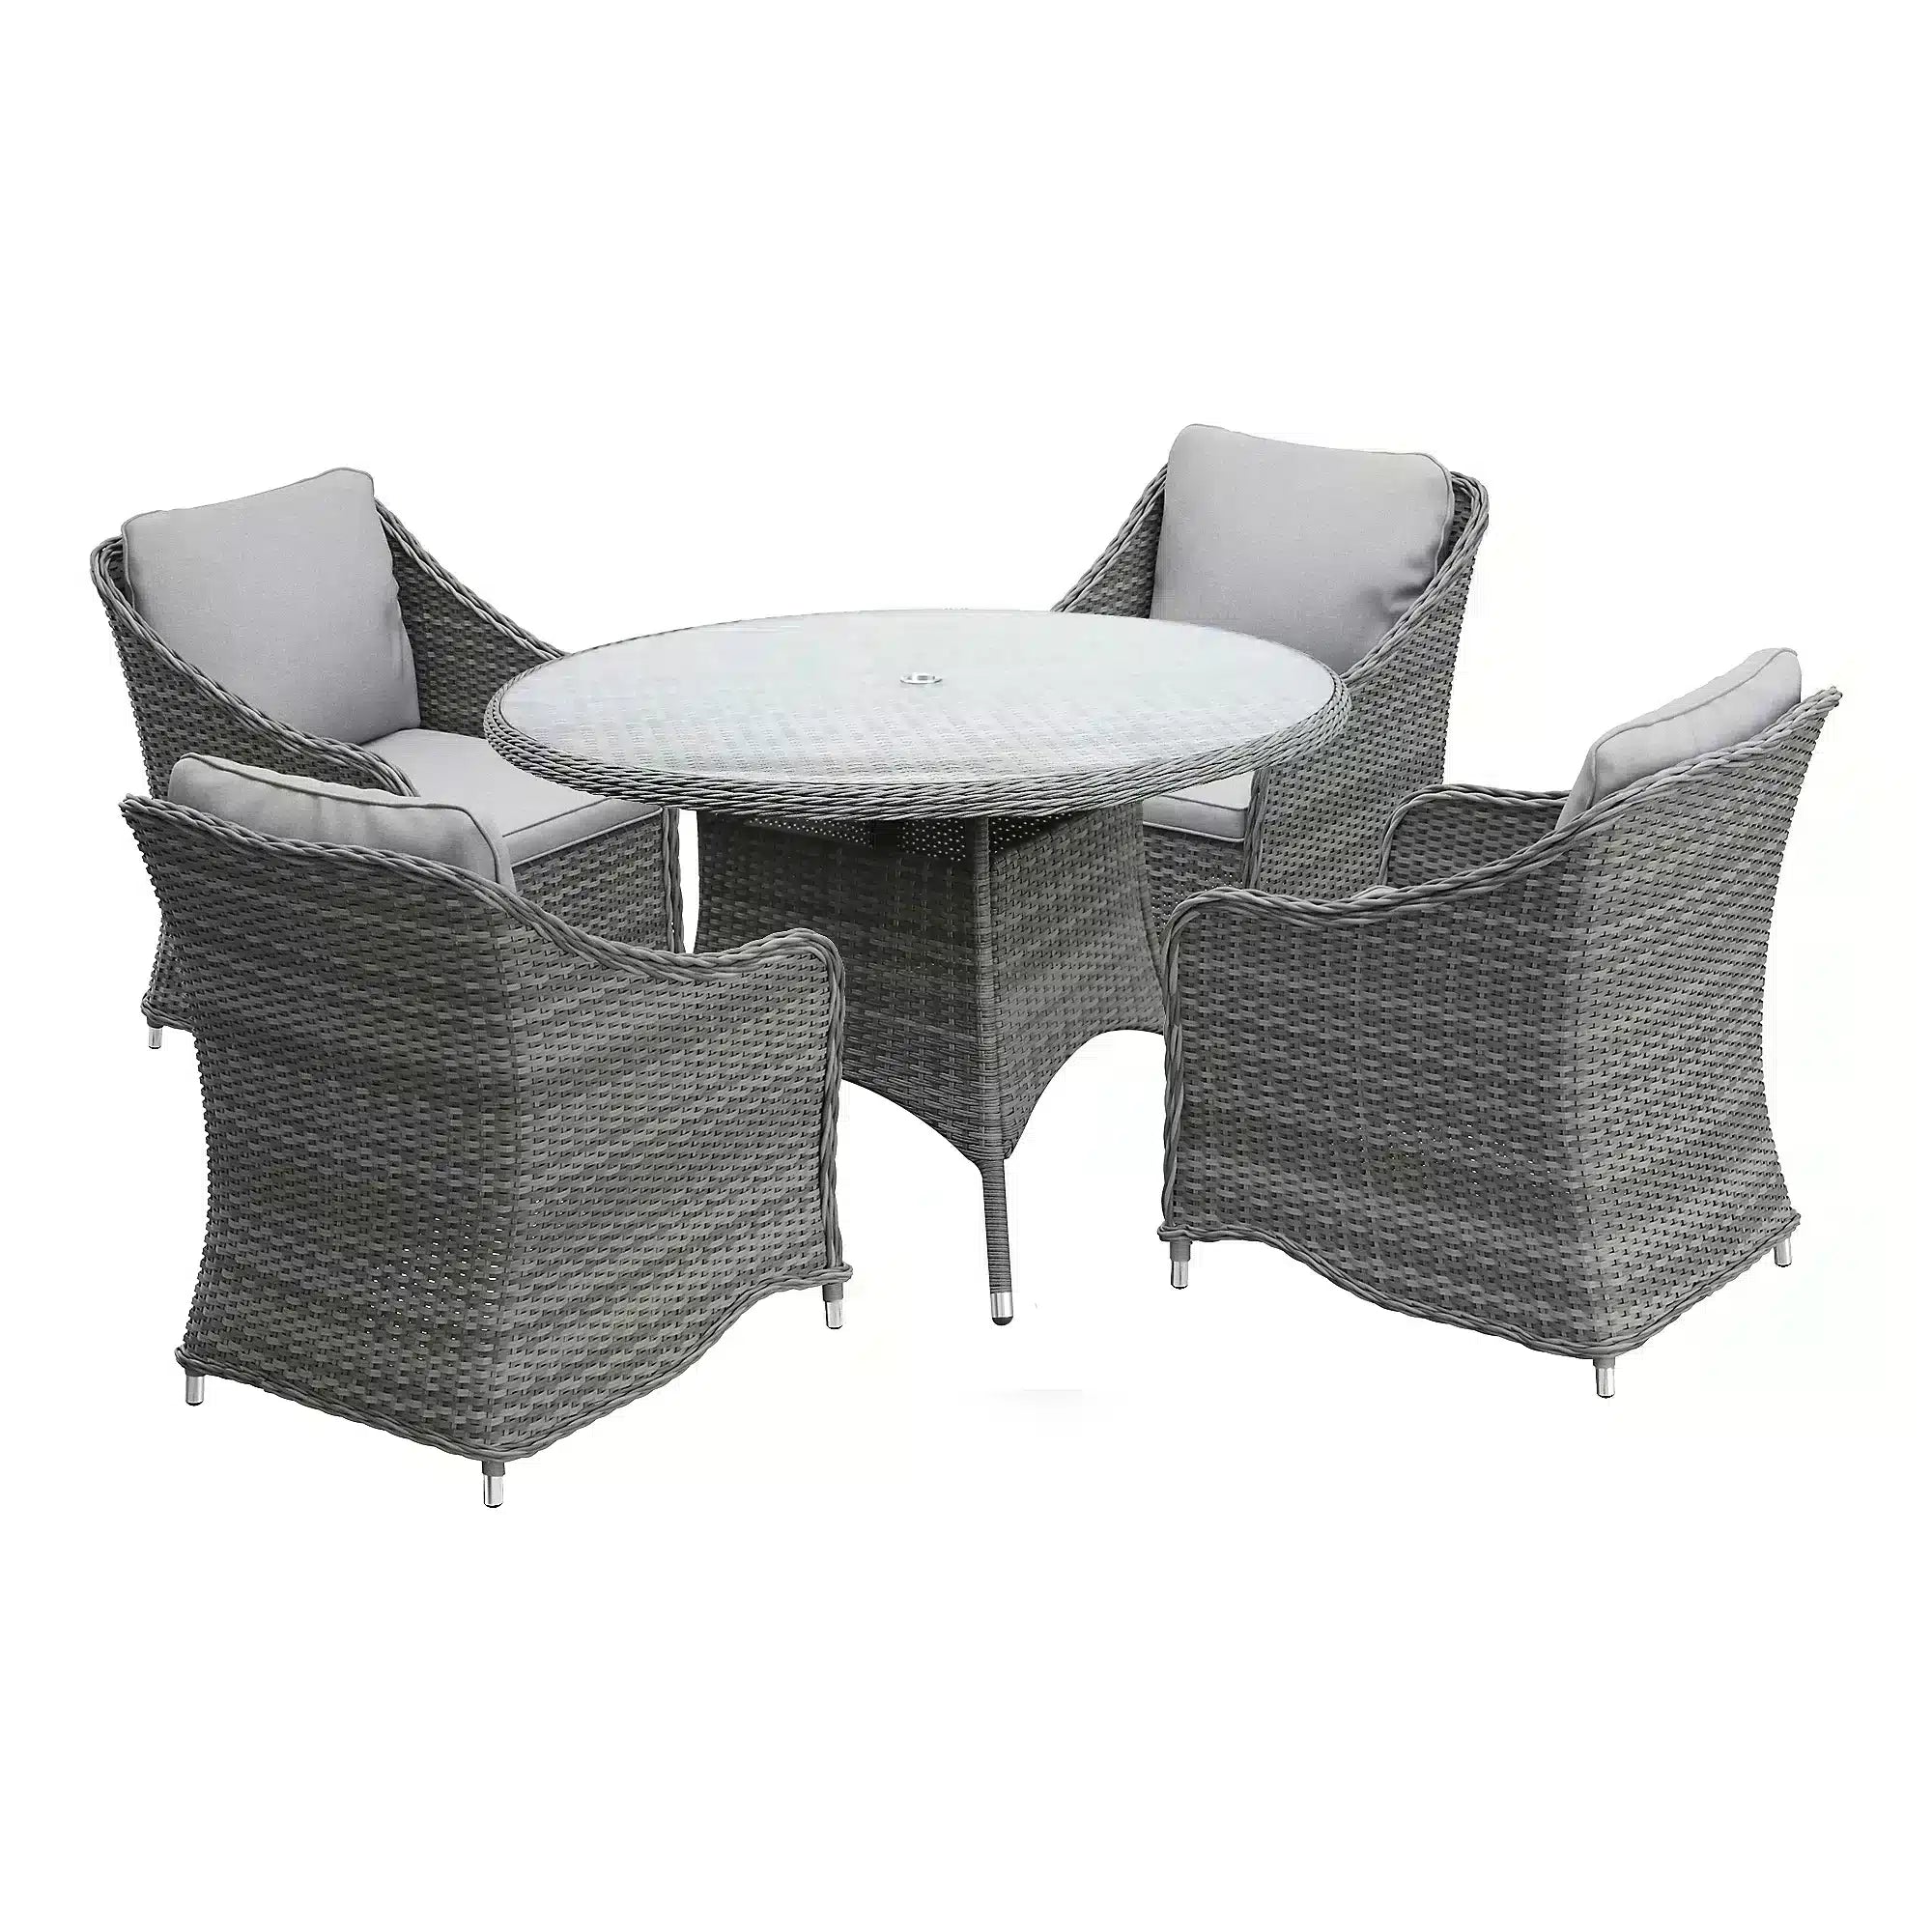 GoodHome Hamilton Rattan effect 4 seater Fixed Dining table, Rattan Garden Table 2589